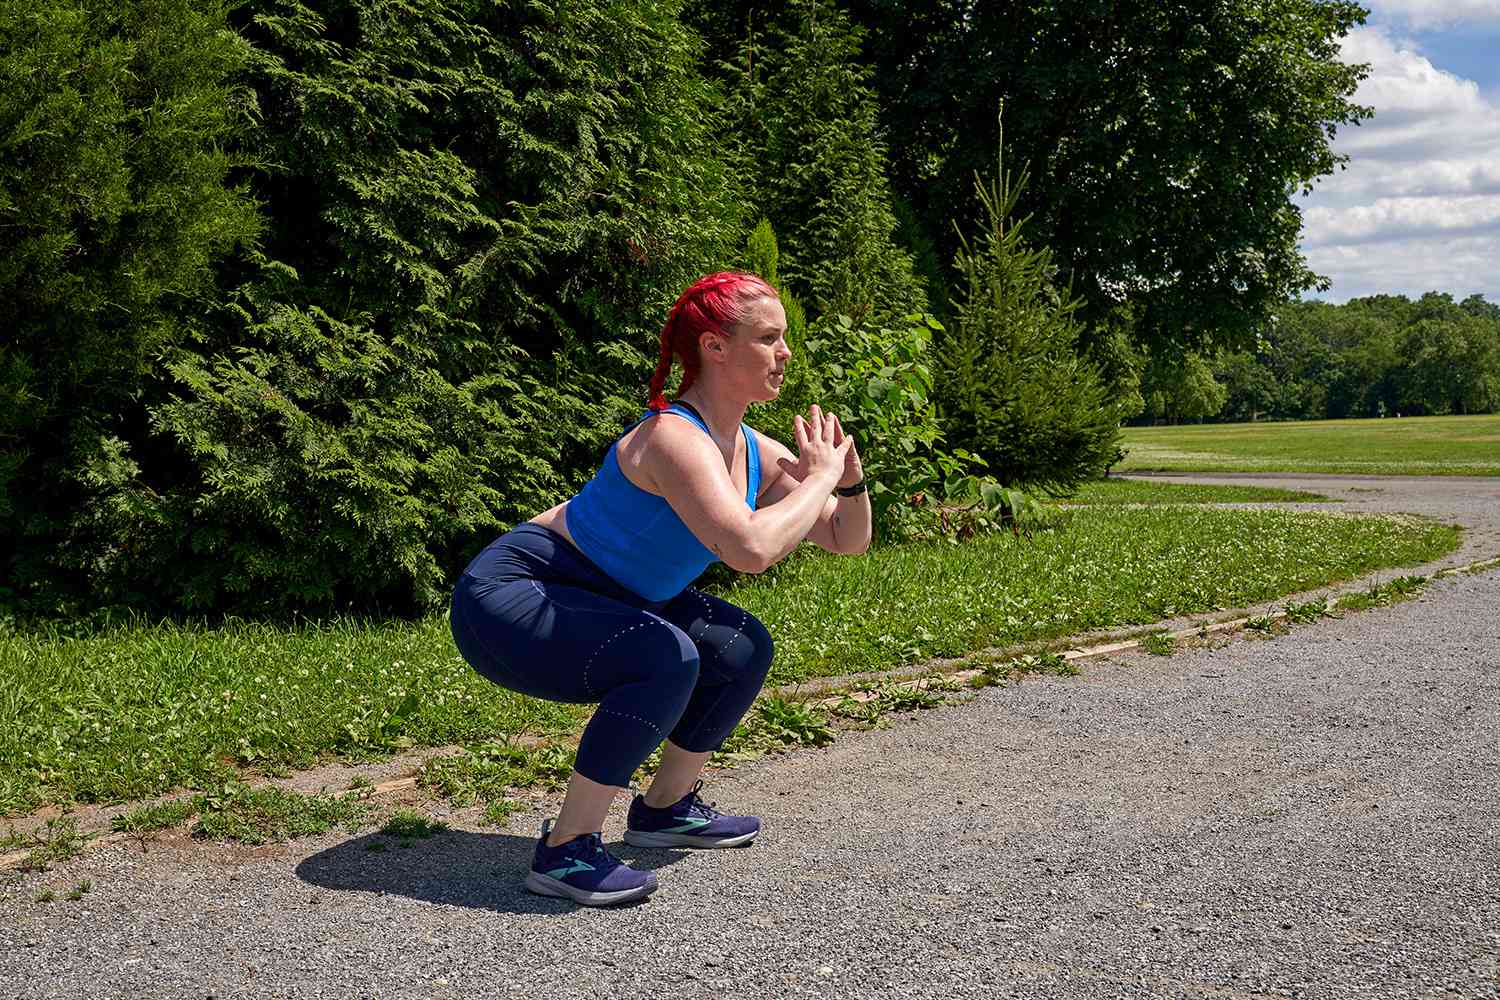 woman doing squats on a paved path in a park